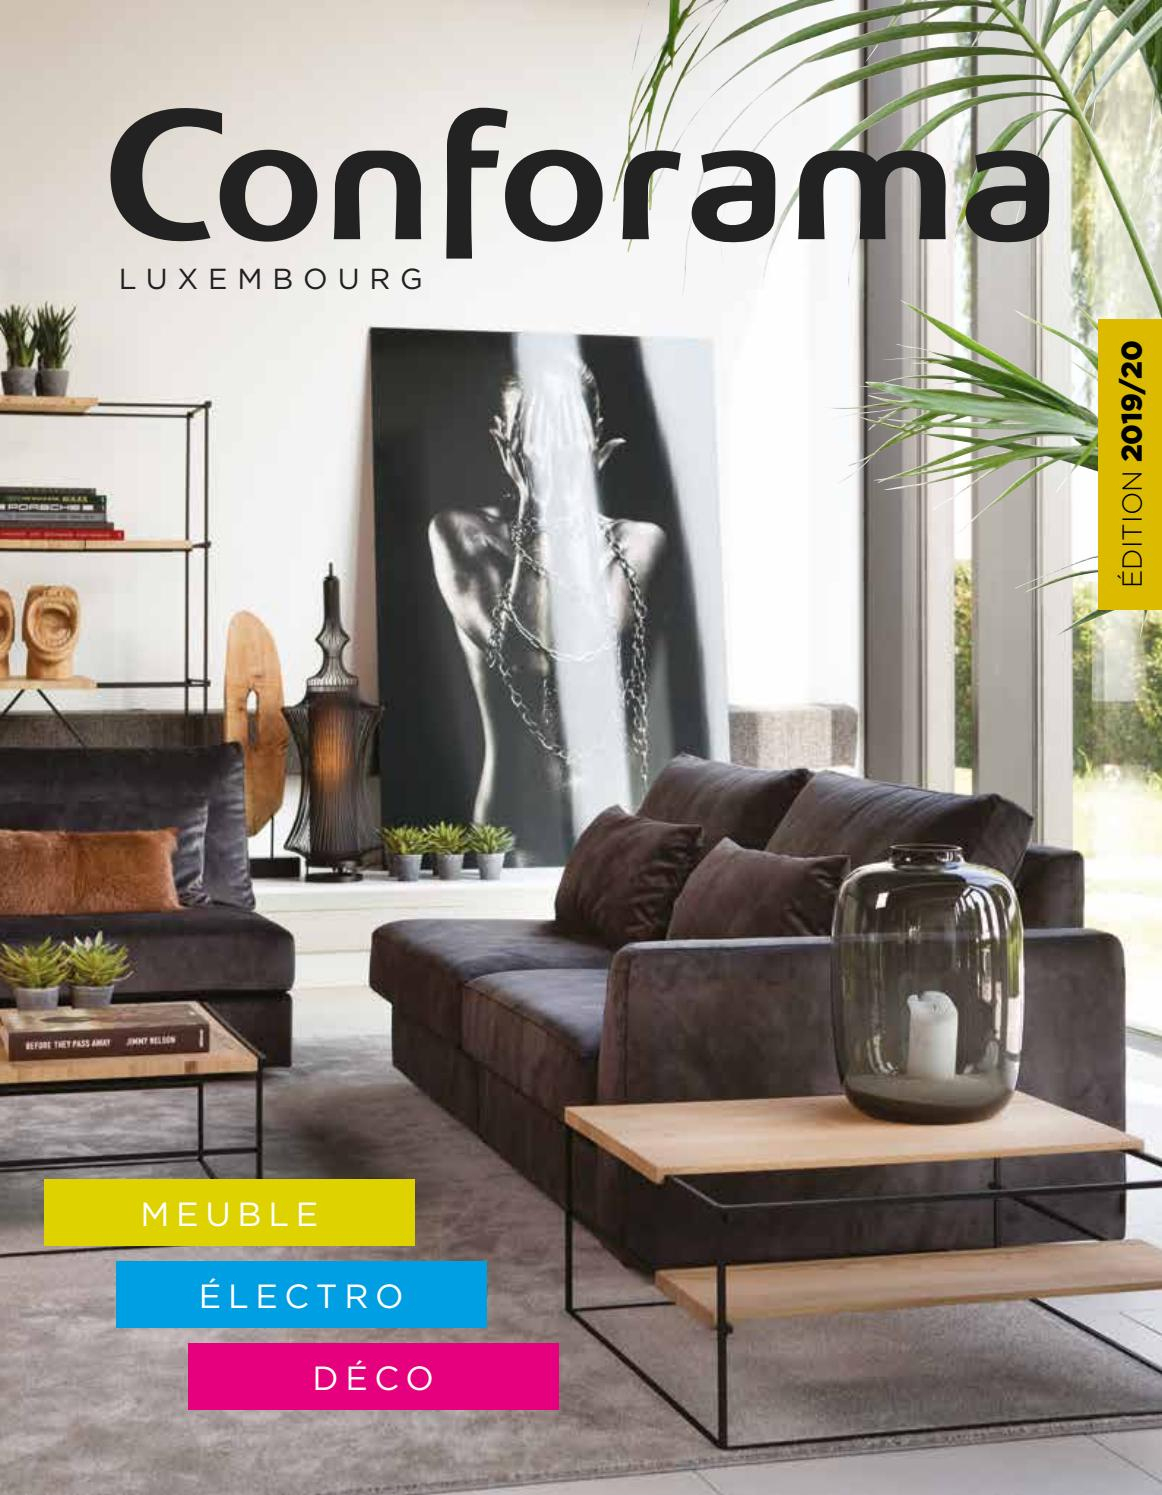 Doc Annuel 2019/20 By Conforama Luxembourg - Issuu pour Lit Releveur Conforama